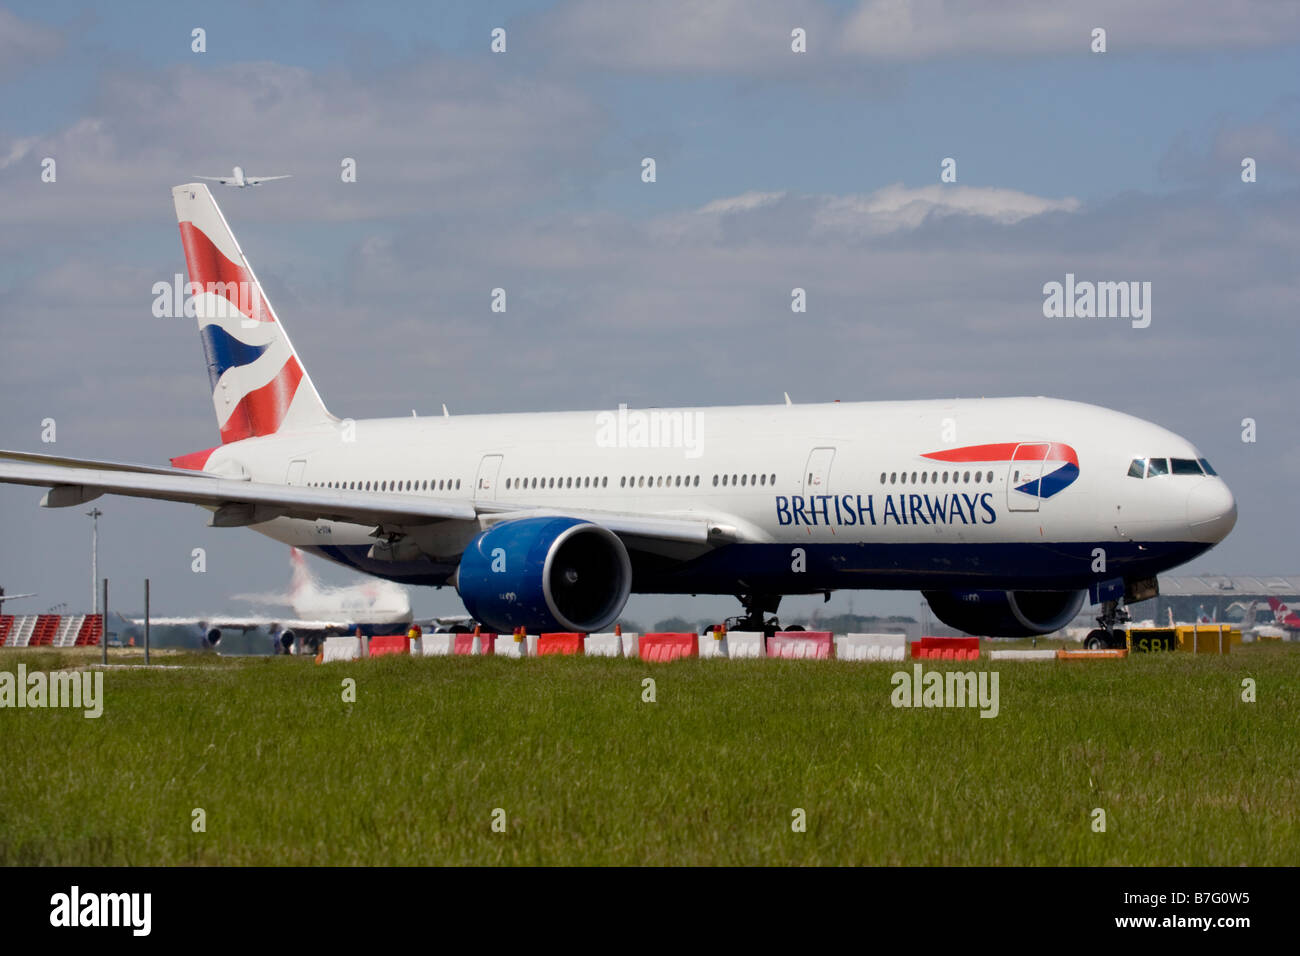 British Airways Boeing 777-236/ER and another commercial airplane taking off in the background at London Heathrow airport. Stock Photo